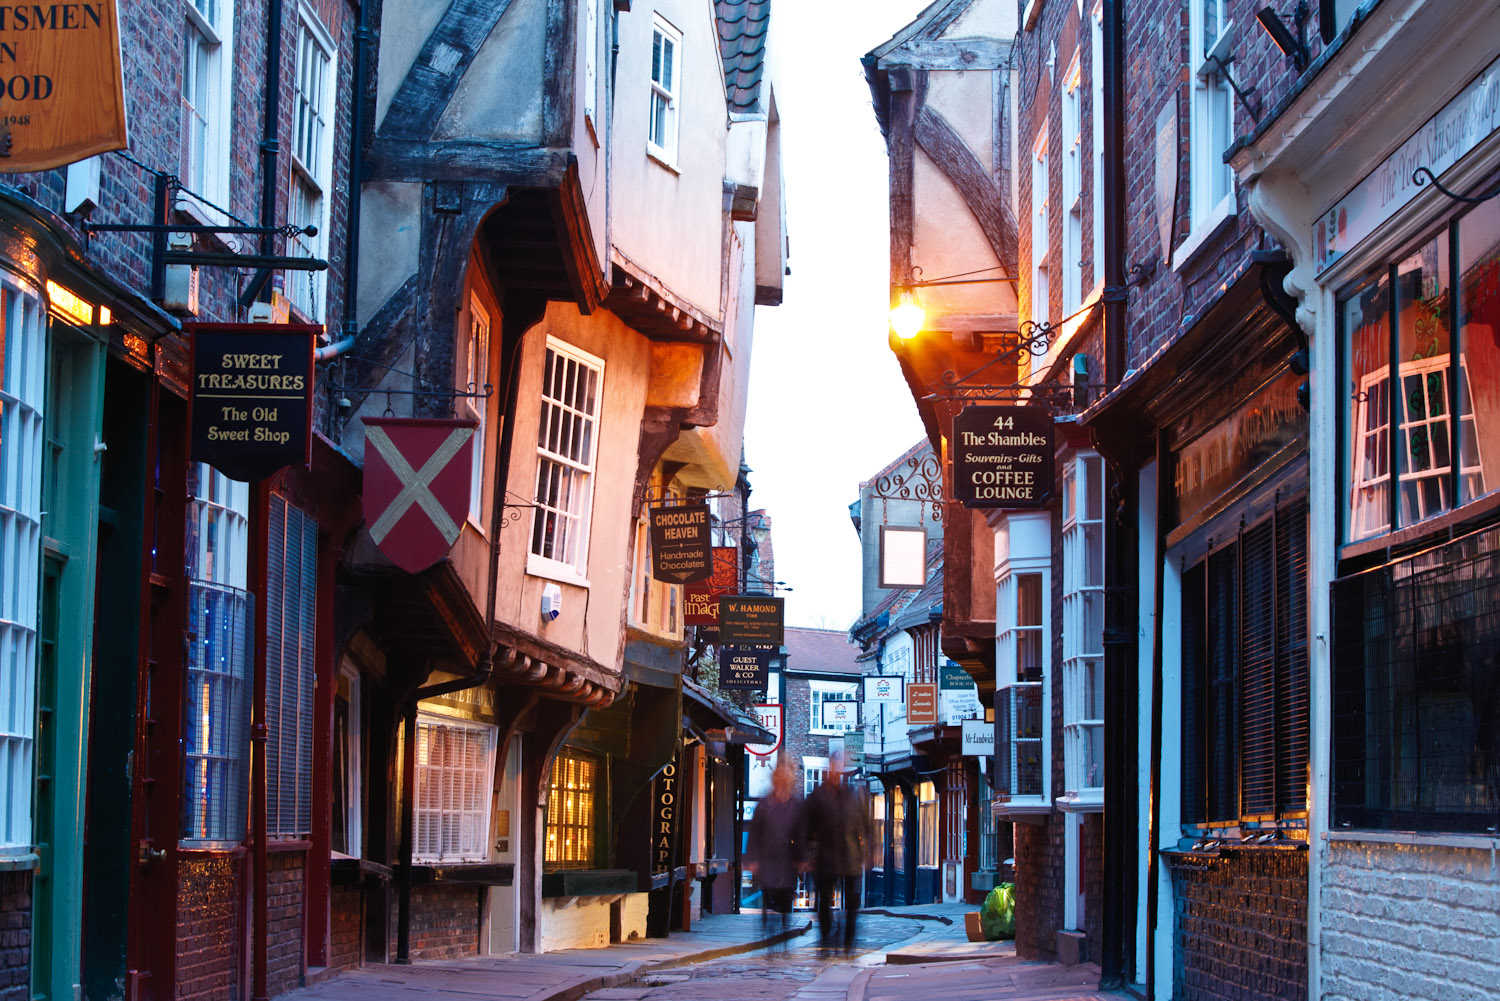 The Shambles in York, England.